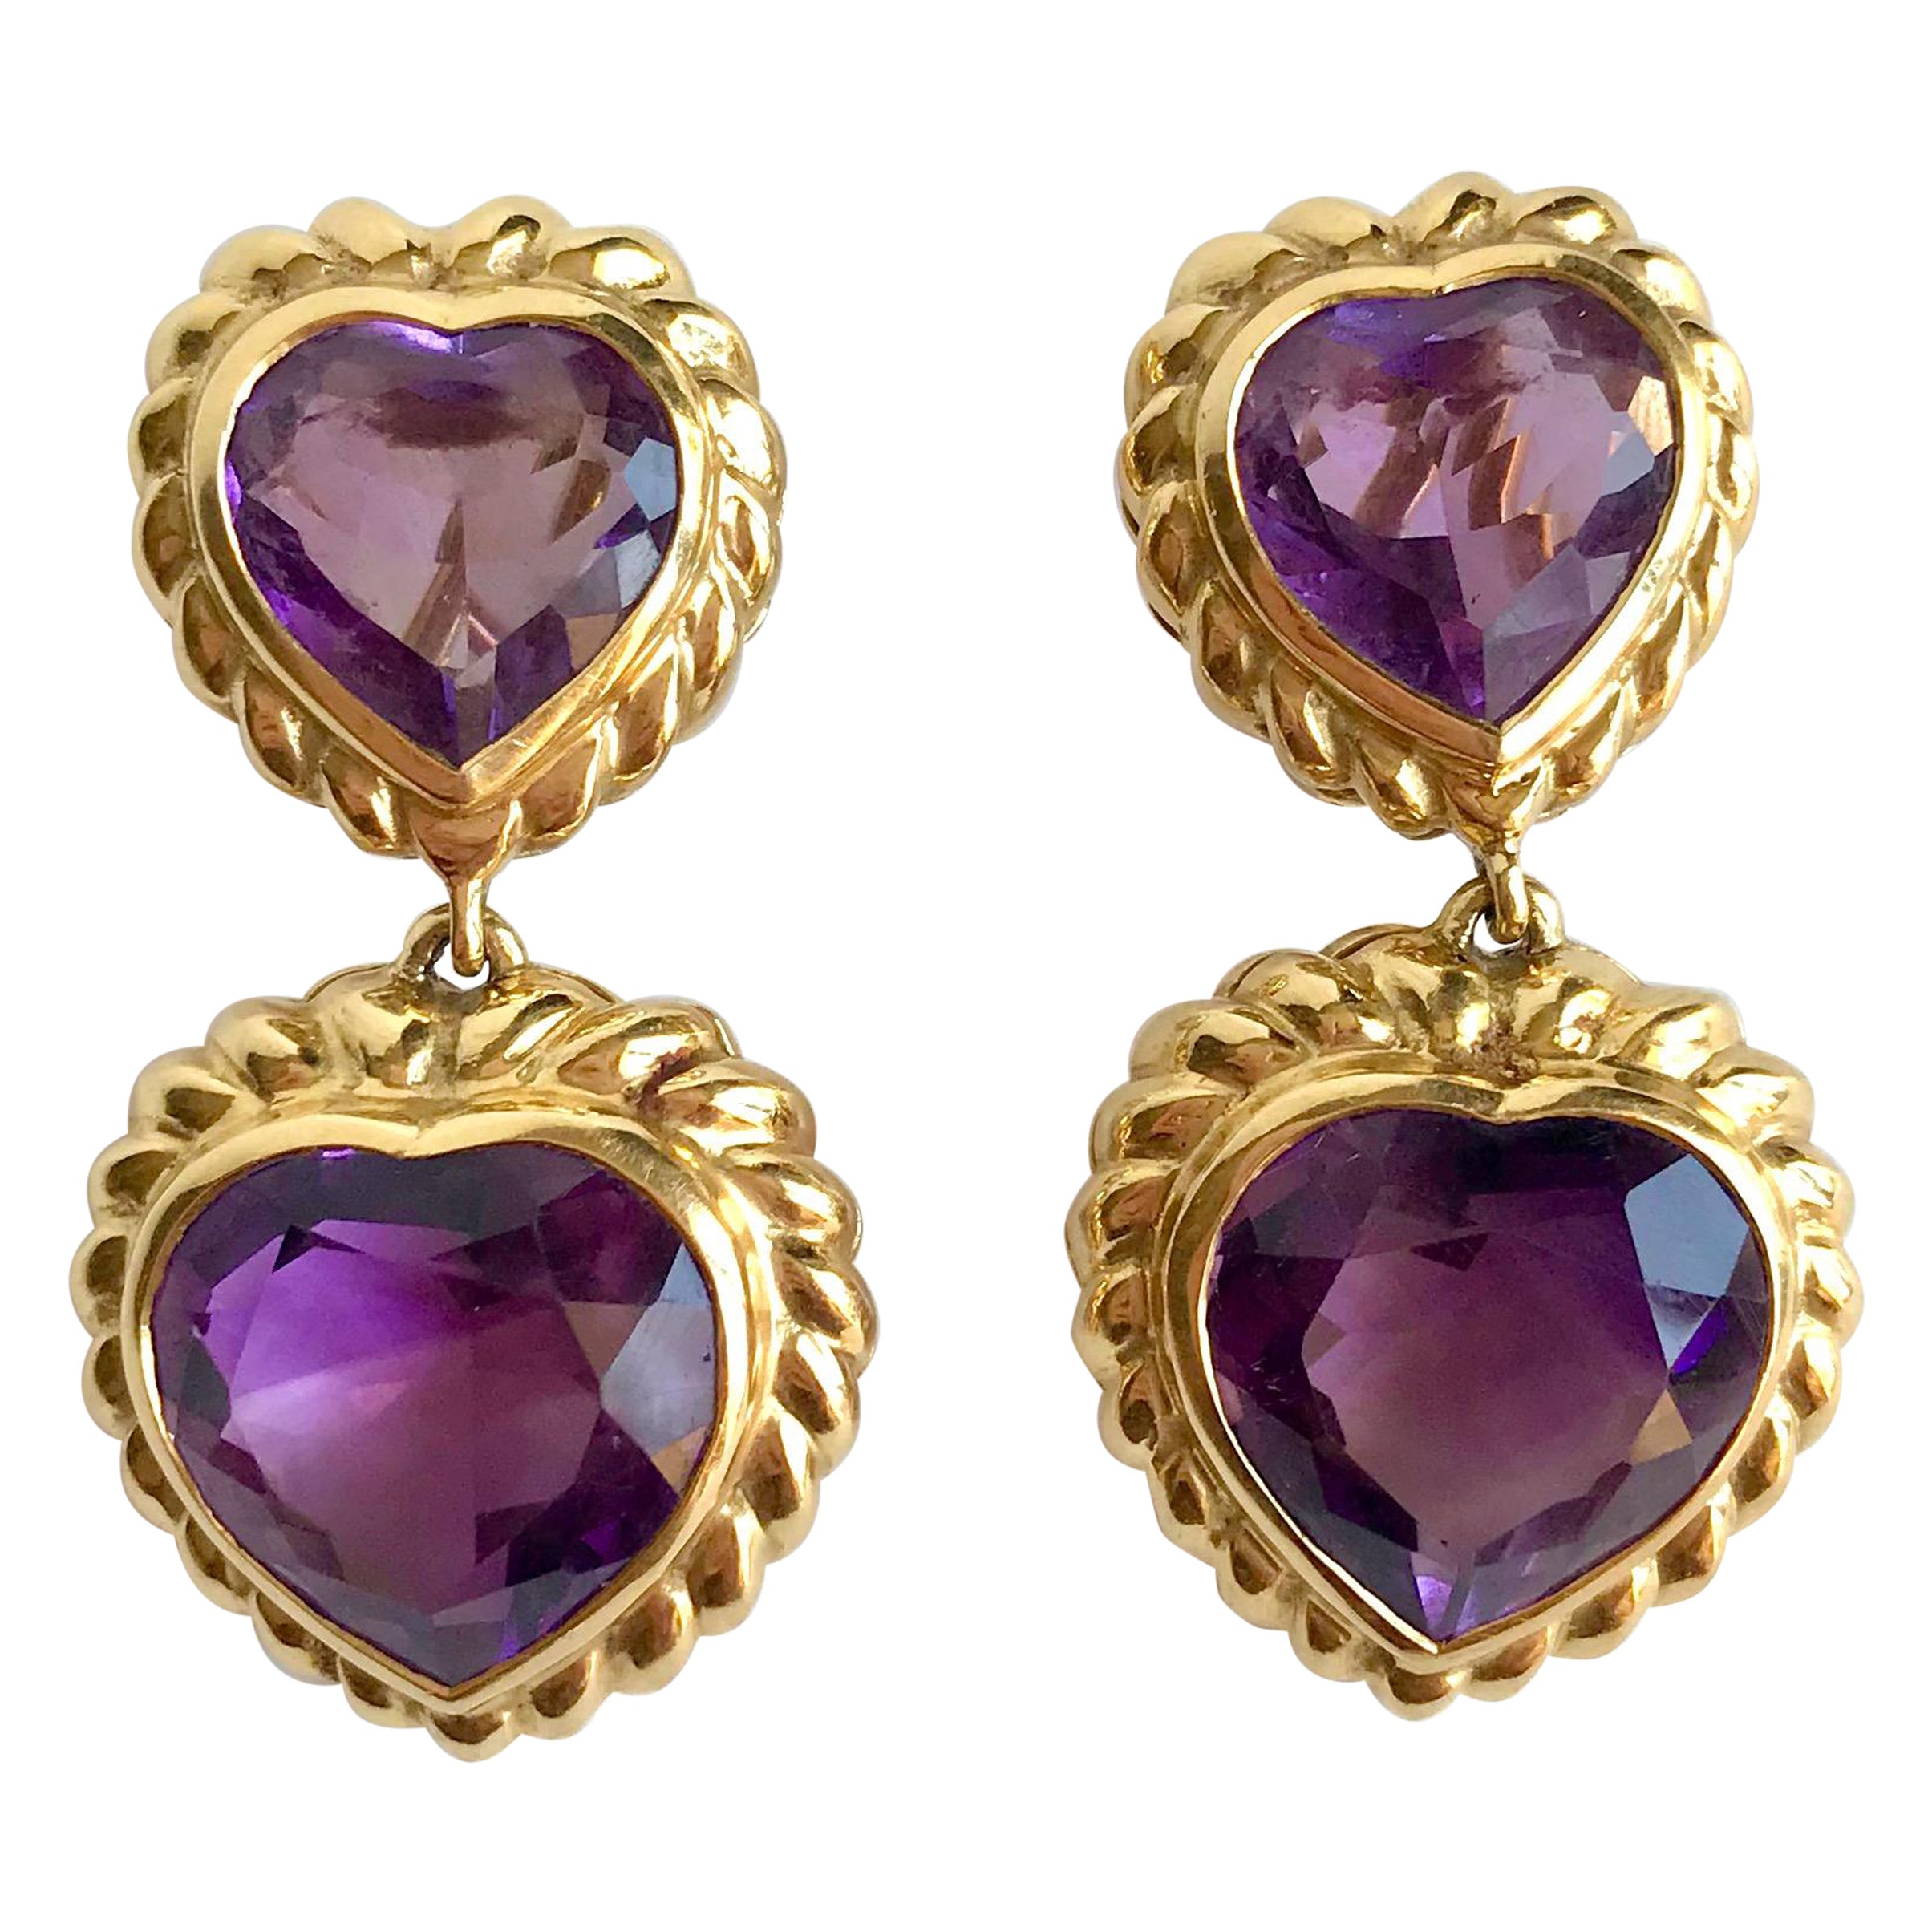 FRED Paris Earrings in 18 Carat Yellow Gold and Amethyst vintage